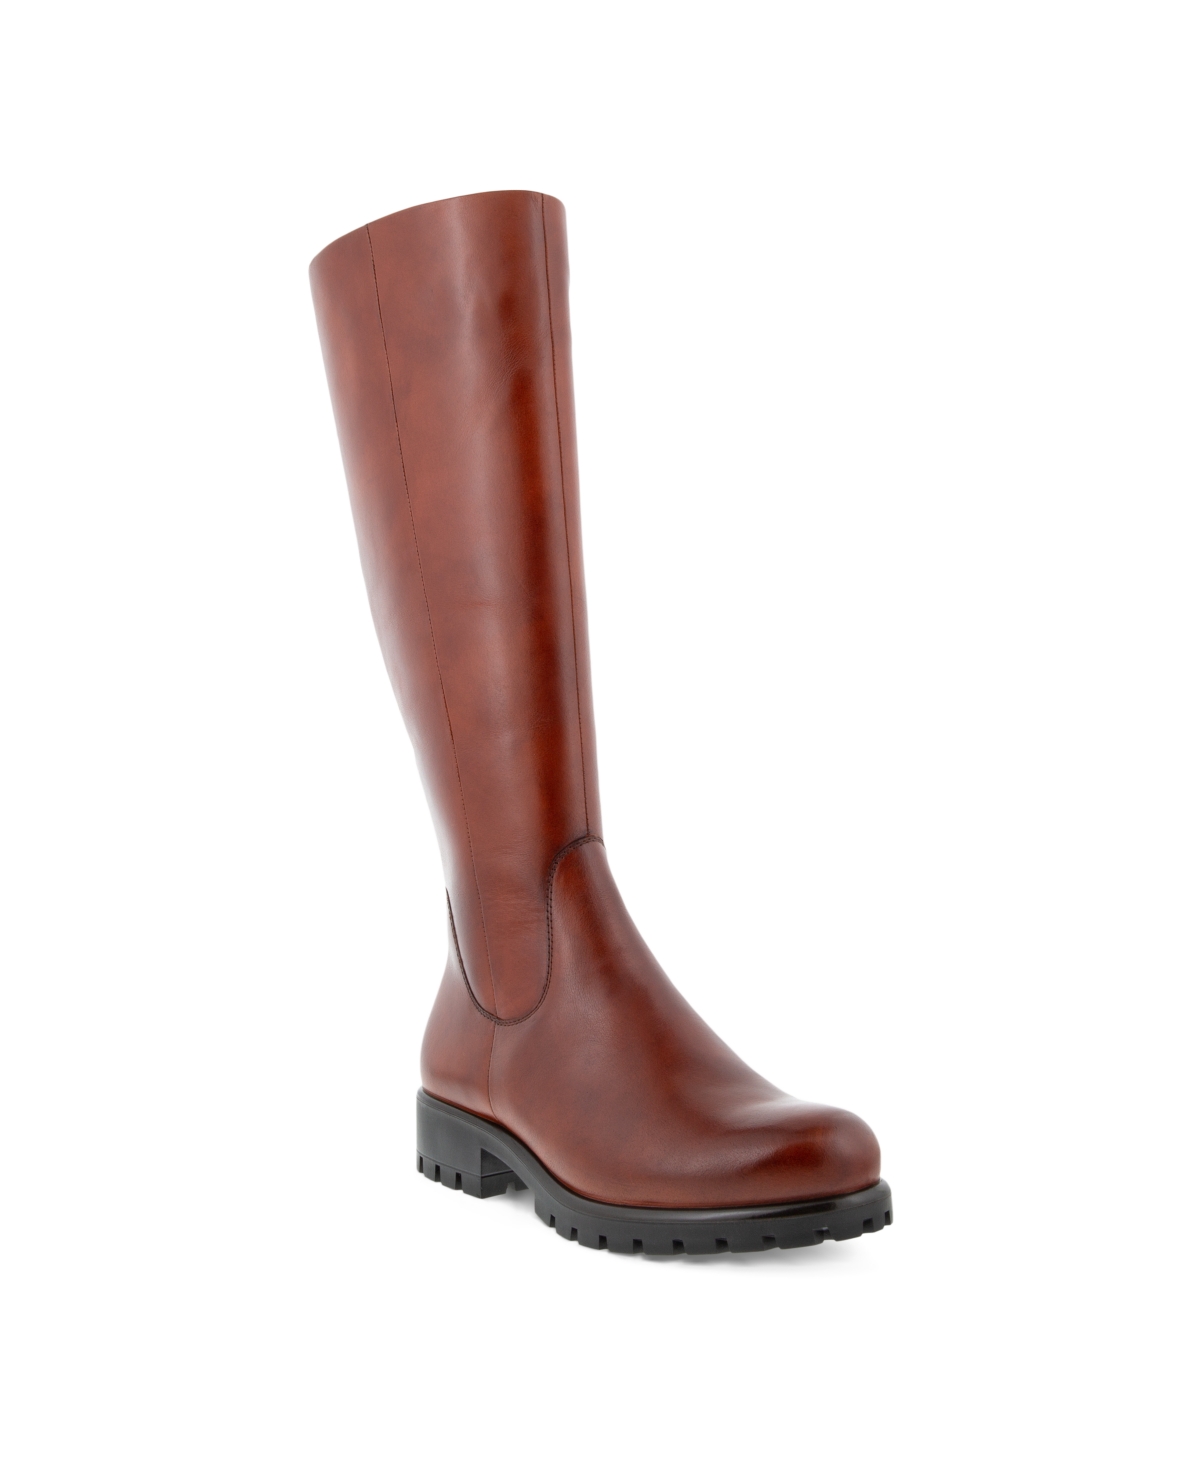 UPC 194890322486 product image for Ecco Women's Modtray High Boots Women's Shoes | upcitemdb.com